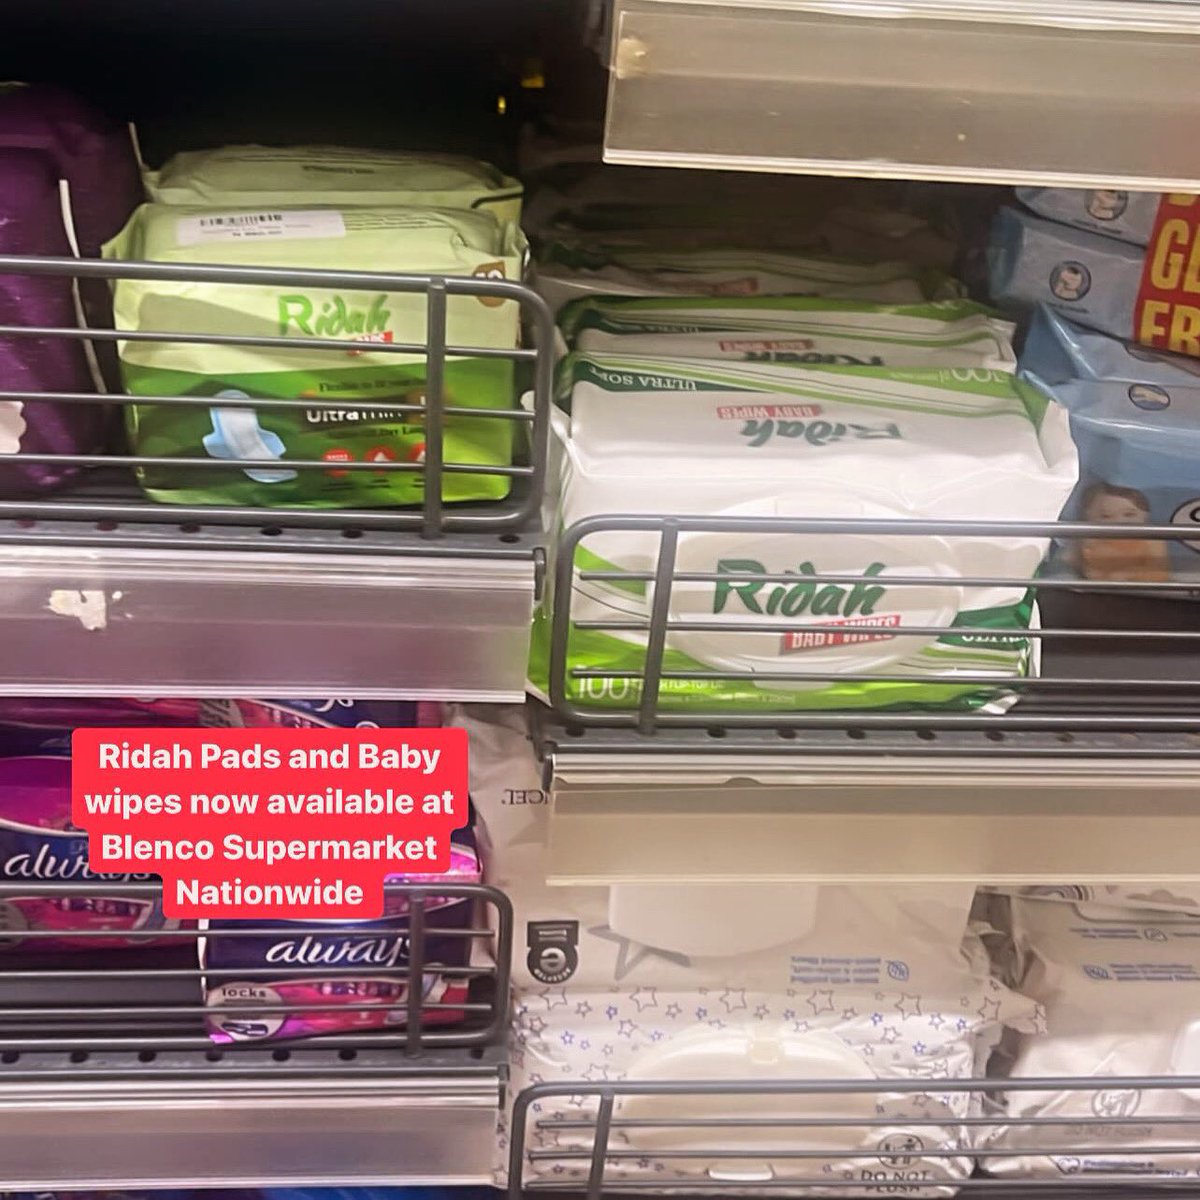 This is your reminder to shop for your Ridah Pads and Baby wipes when next you visit Blenco Supermarket.

#ridahproducts #babywipes #babies #wetwipes #shop #supermarket #sanitarypad #women